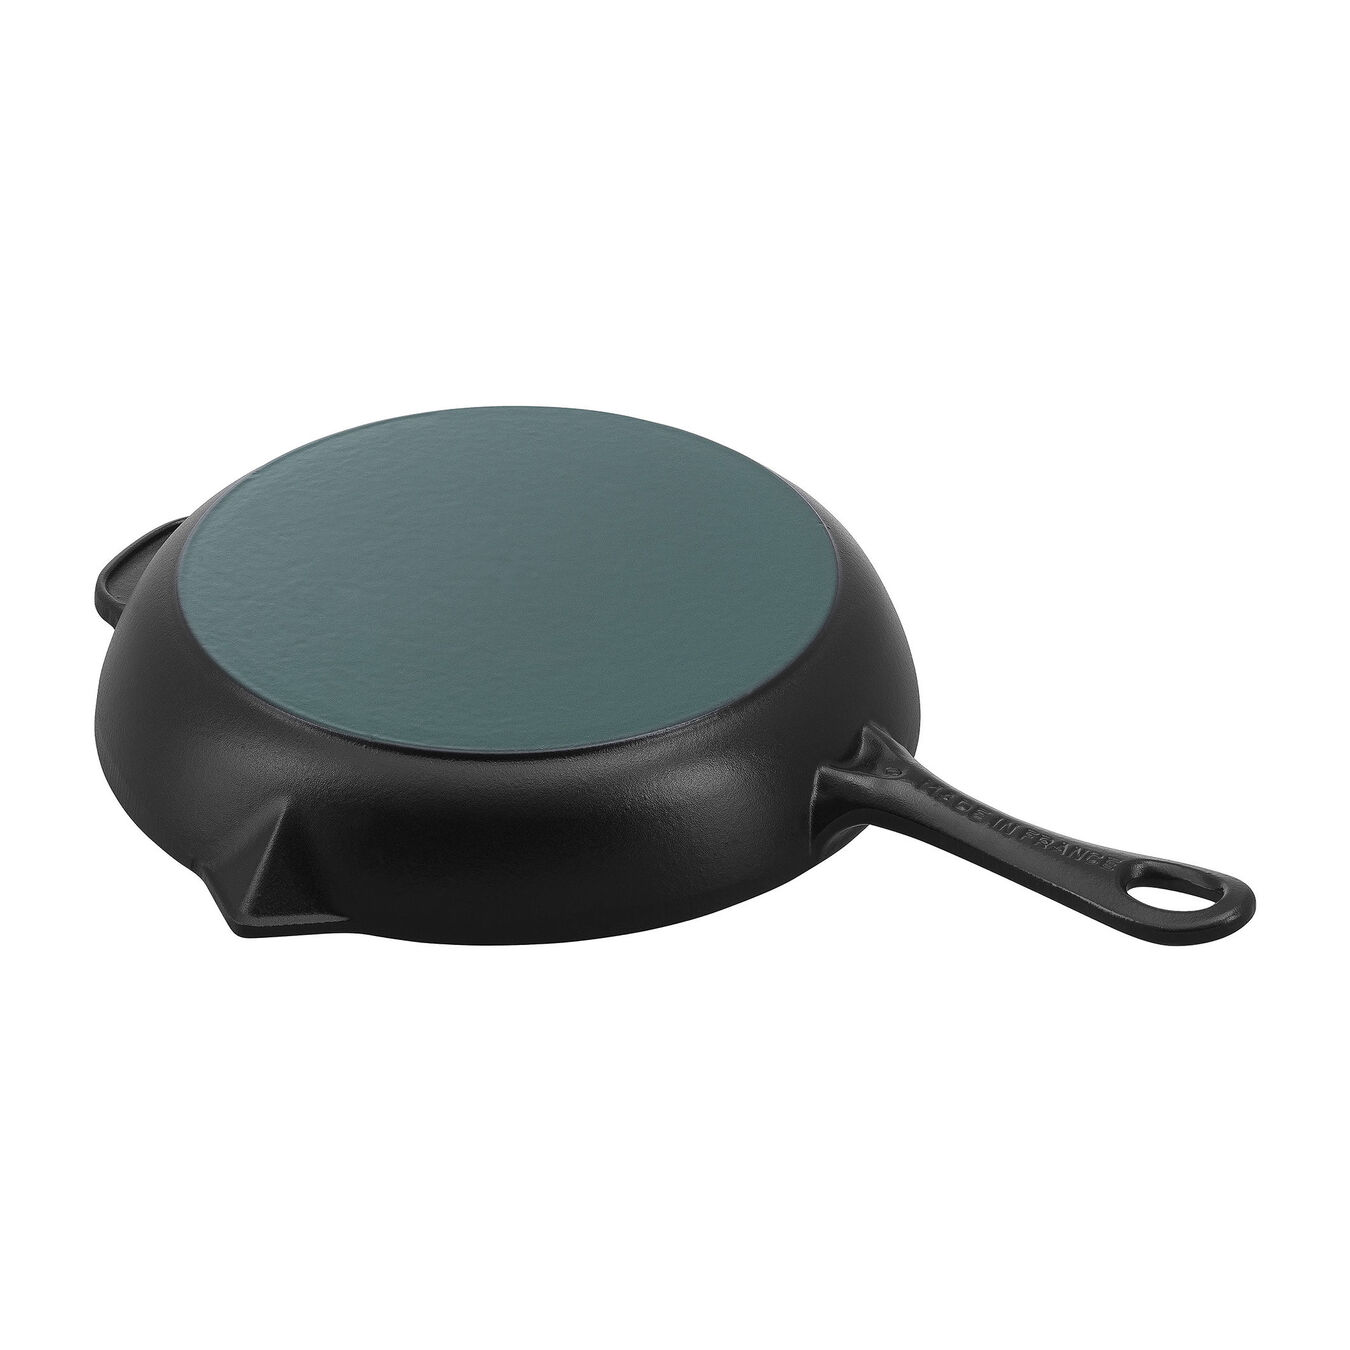 26 cm / 10 inch cast iron Frying pan with pouring spout, black,,large 2